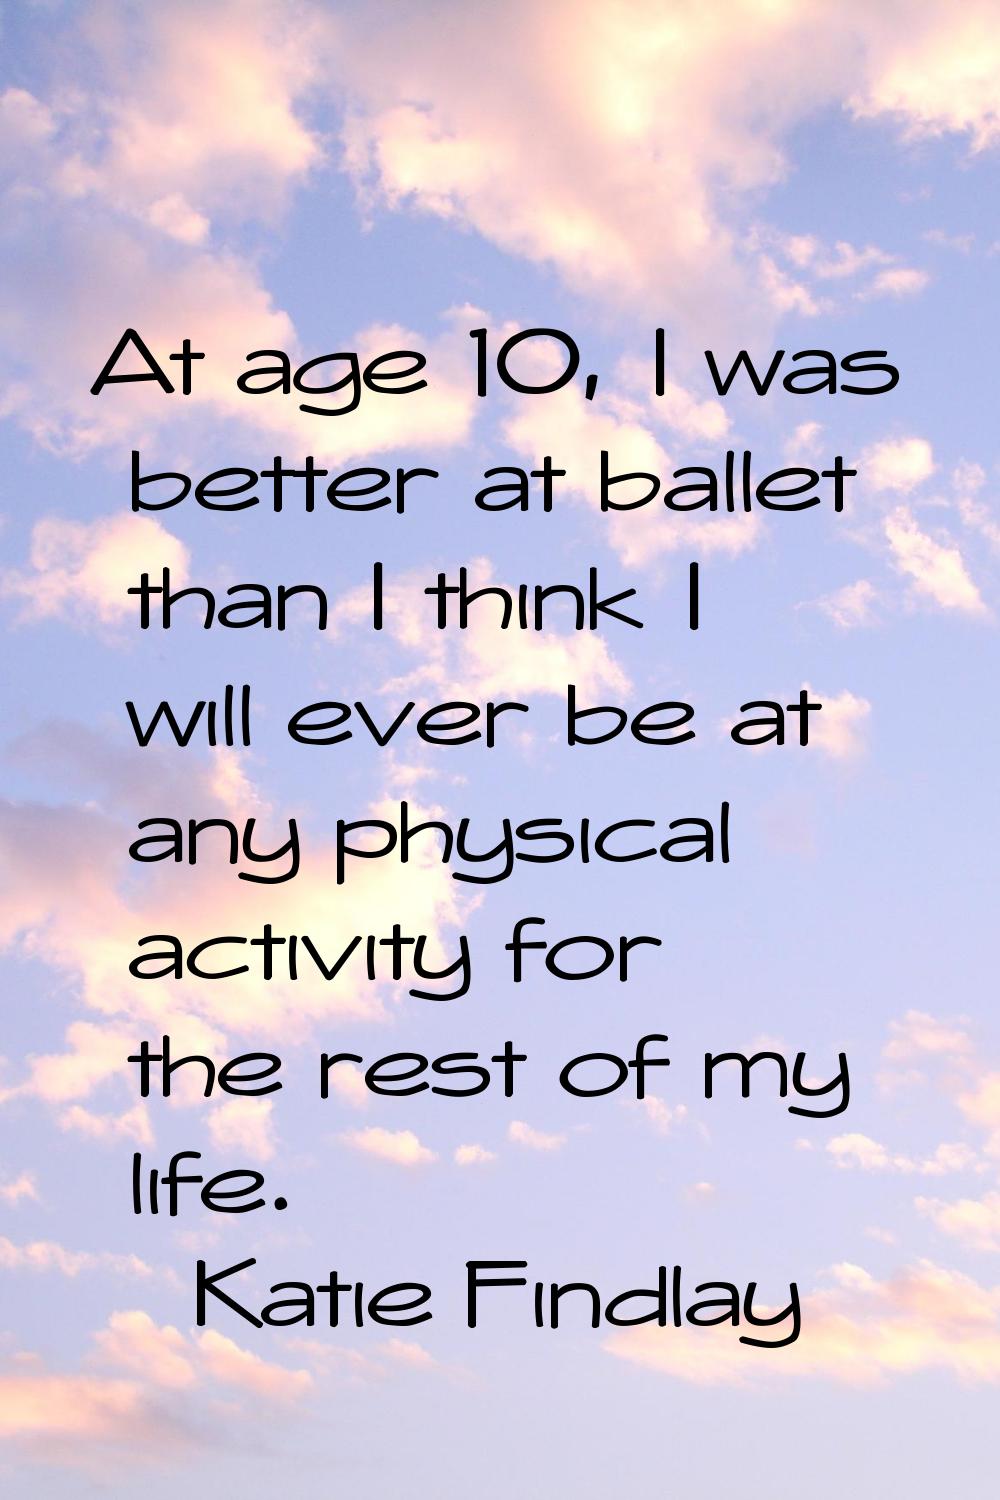 At age 10, I was better at ballet than I think I will ever be at any physical activity for the rest